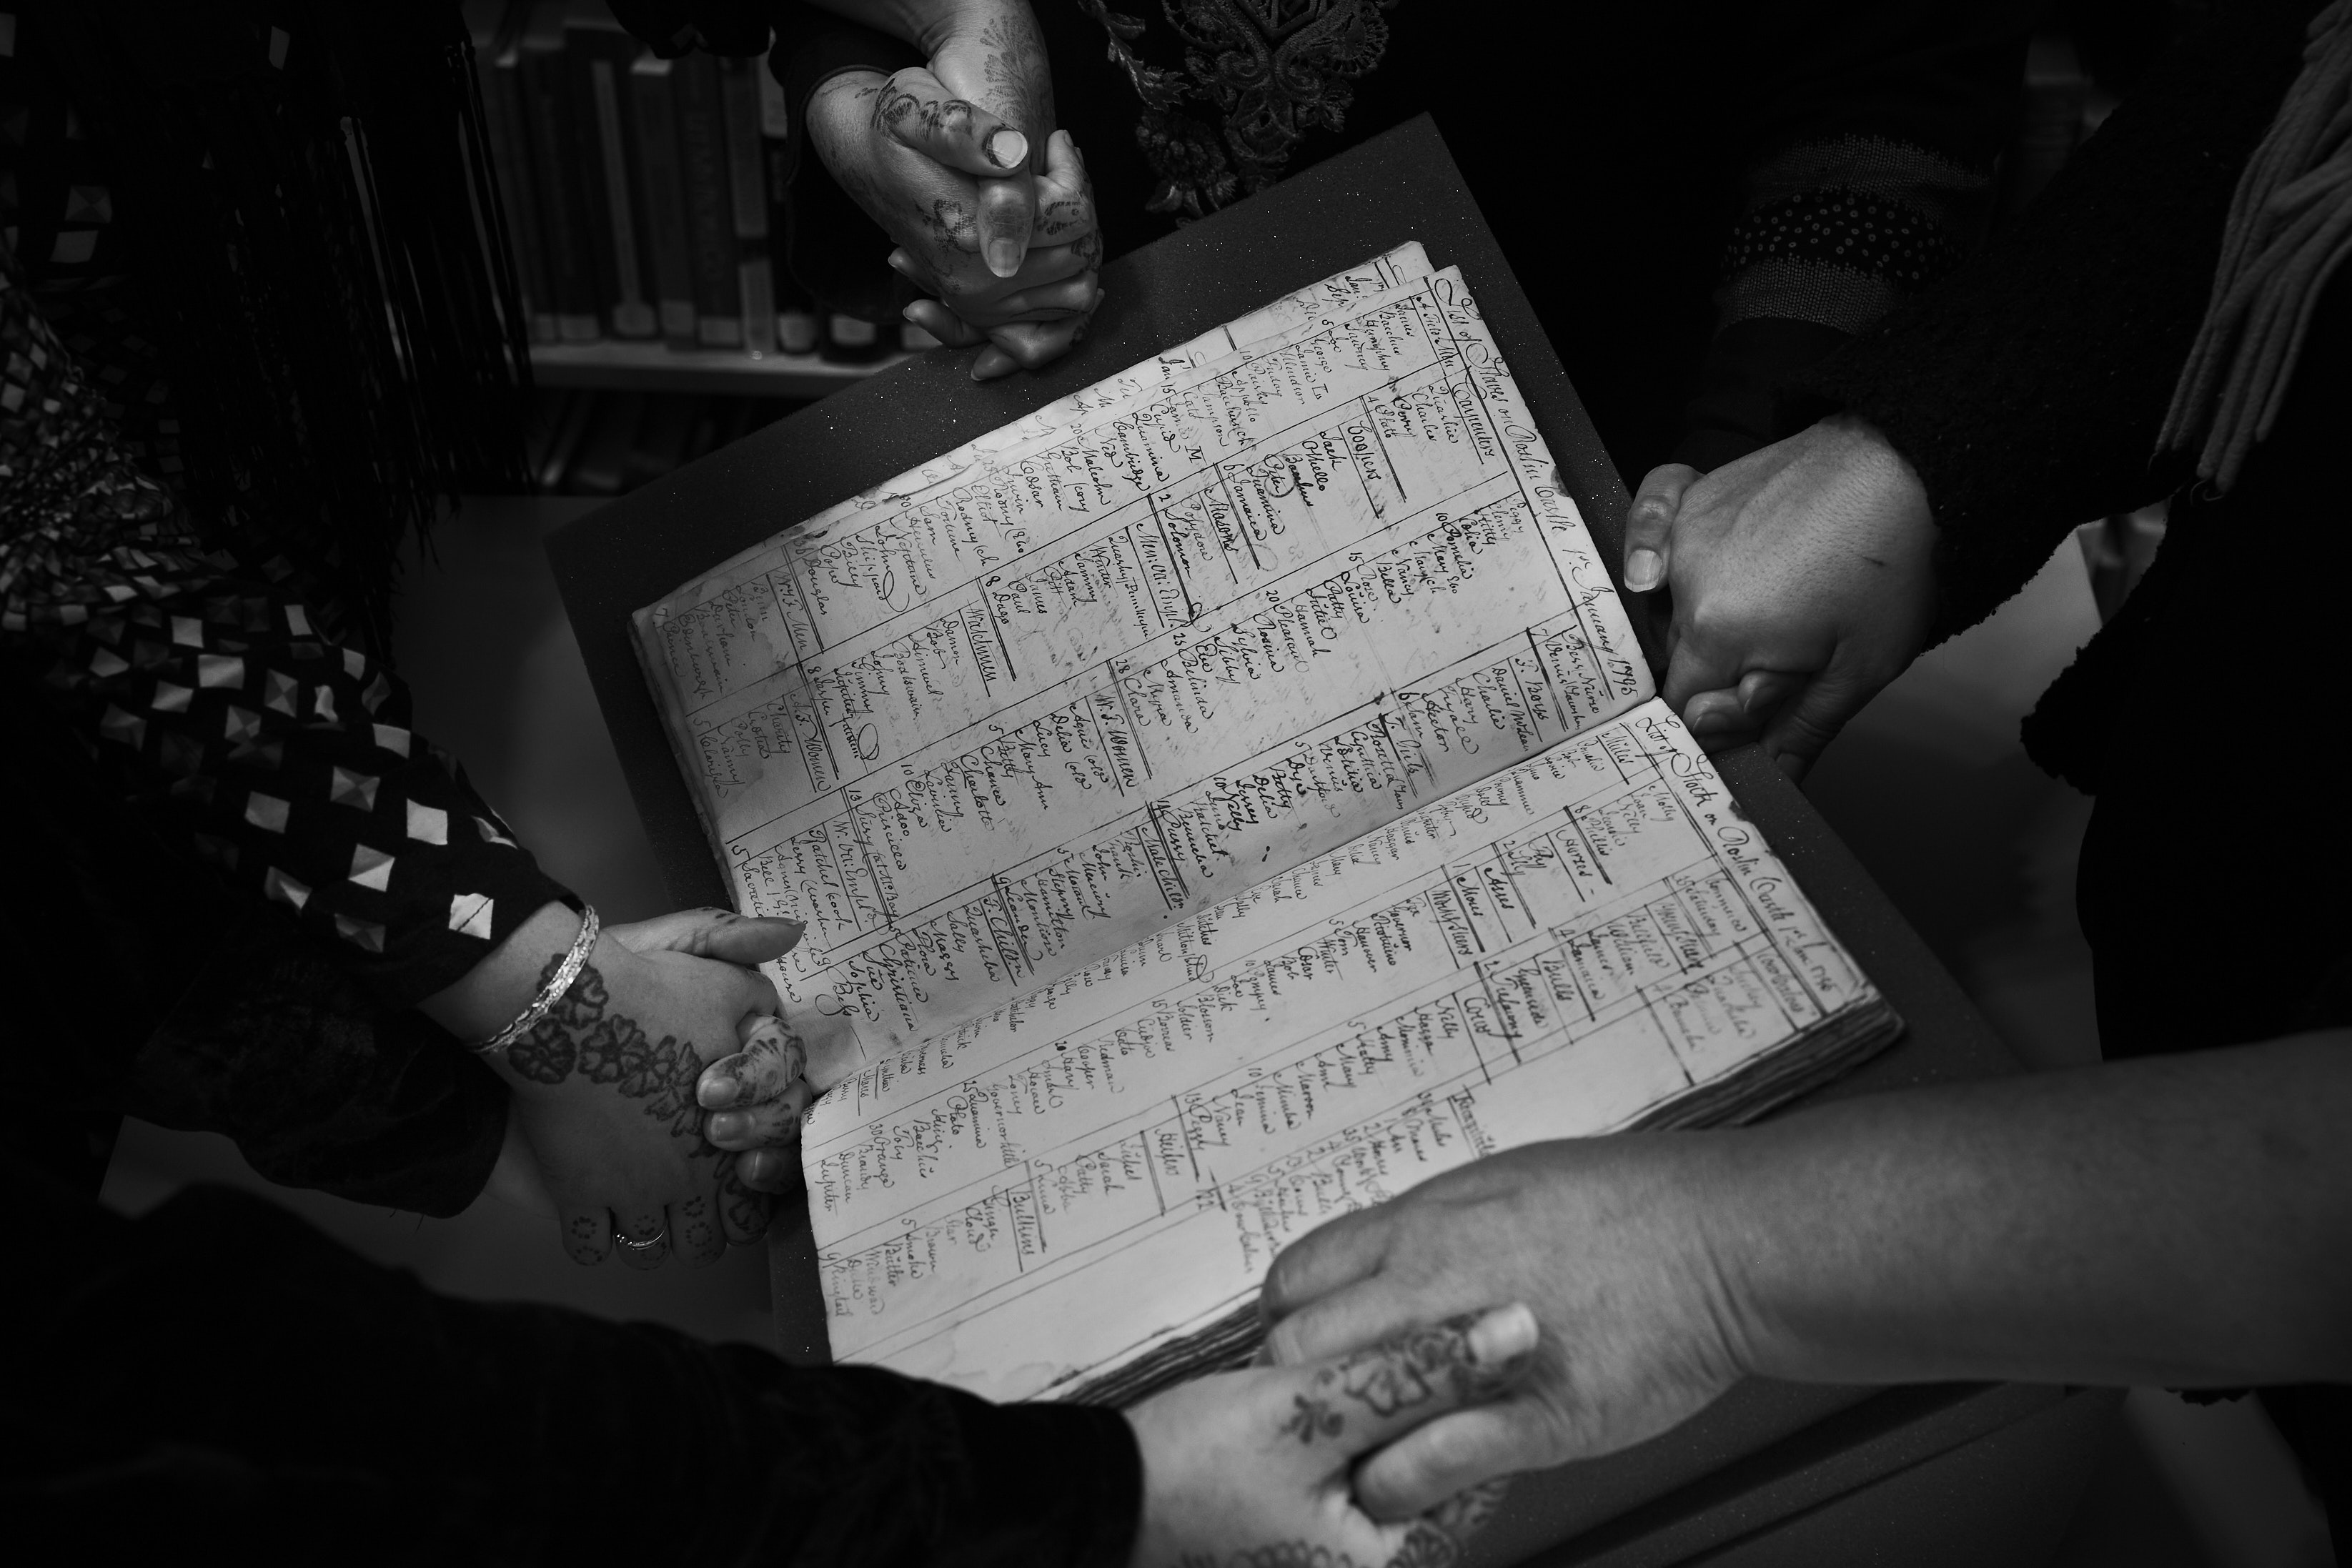 Black and white photo of people holding hands around an old slavery ledger